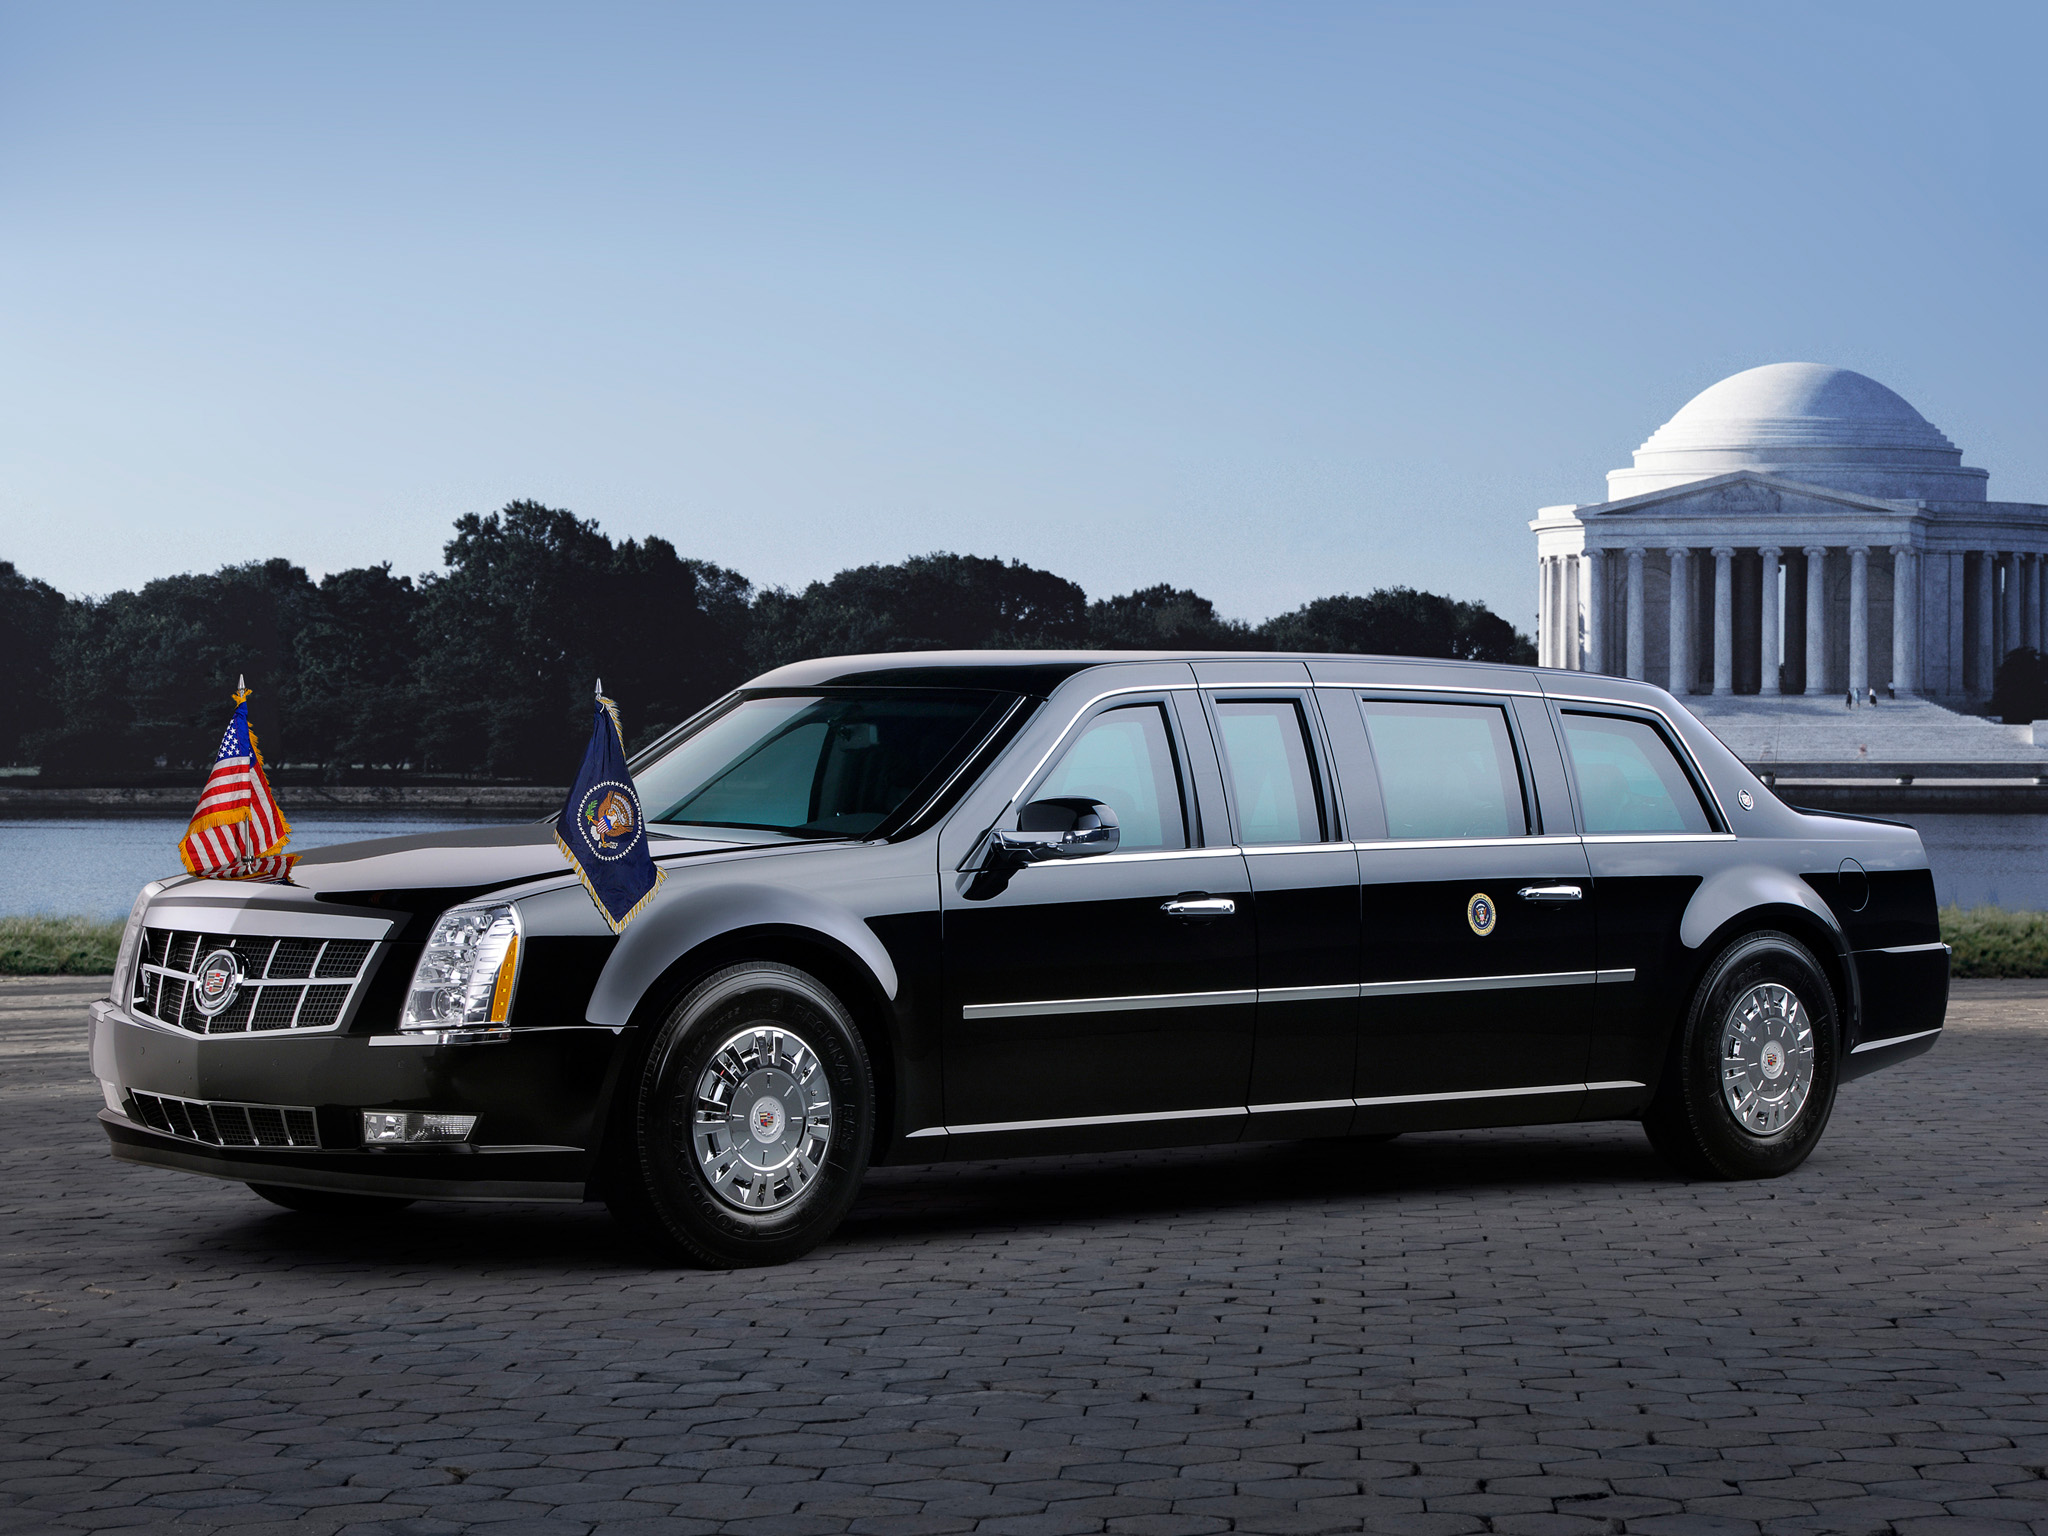 2009, Armored, Cadillac, Presidential, State, Luxury Wallpaper